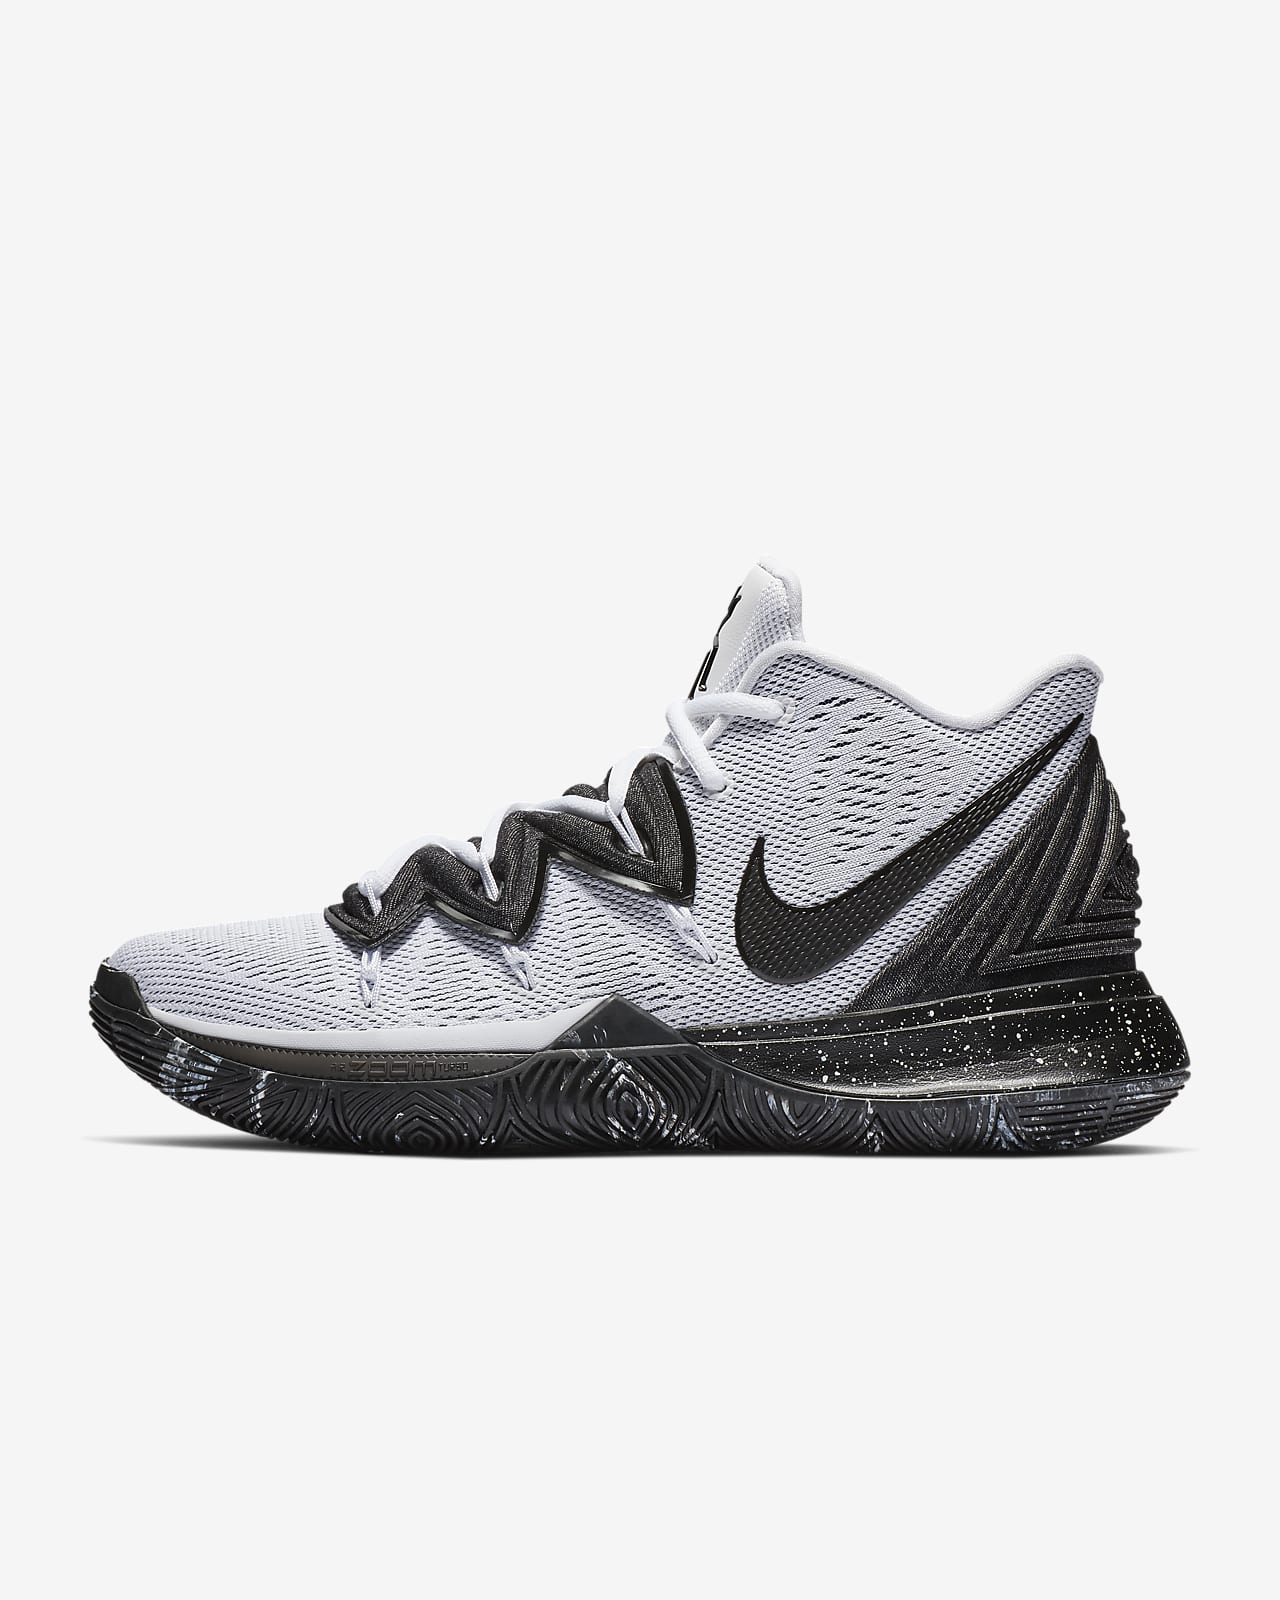 kyrie 5 size 4